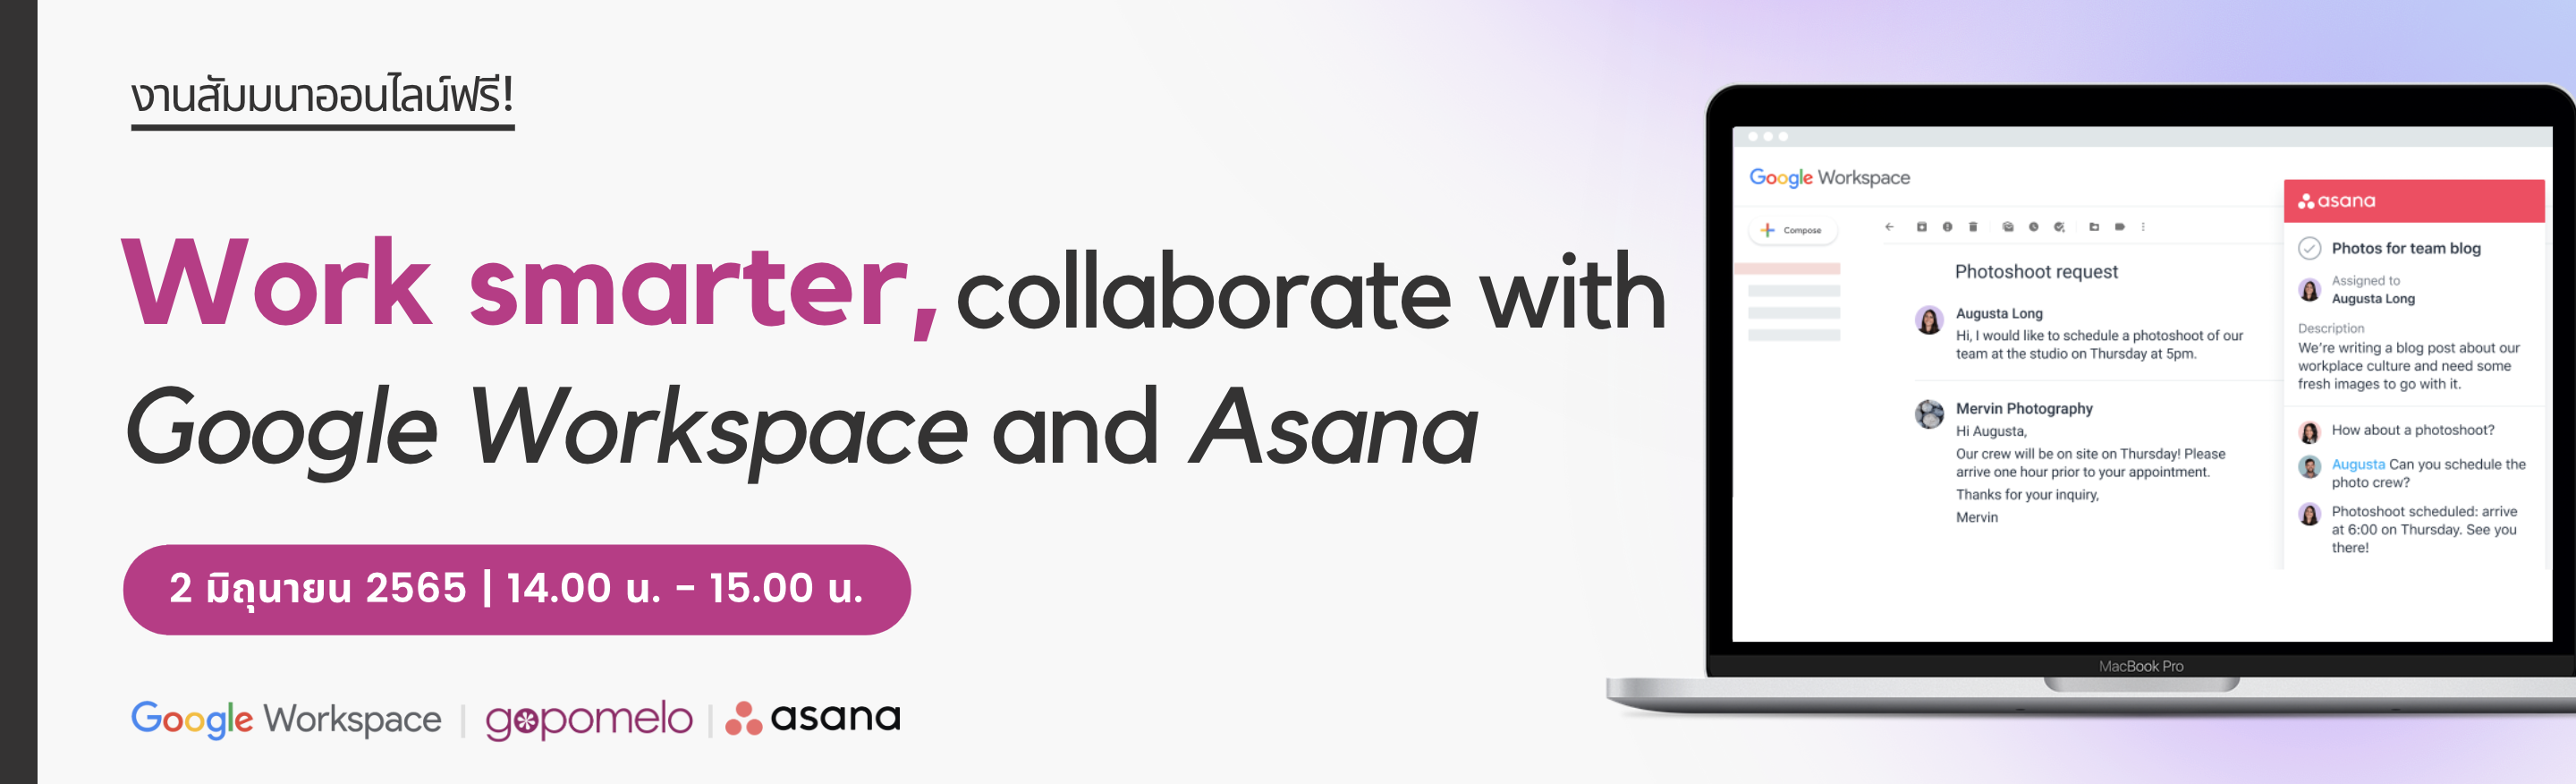 Work smarter, collaborate with Google Workspace and Asana